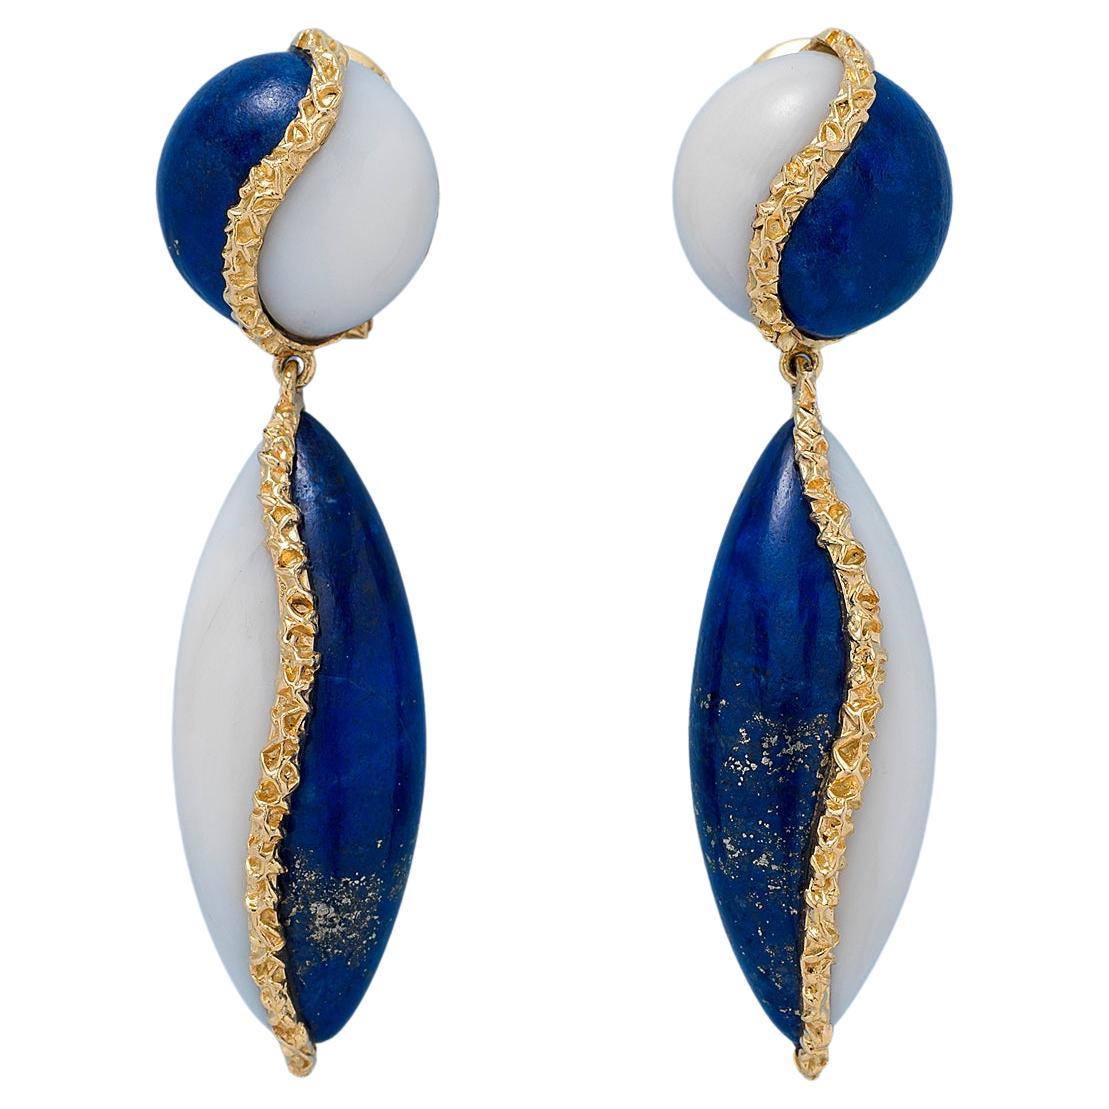 Gold, Lapis and Coral Earrings